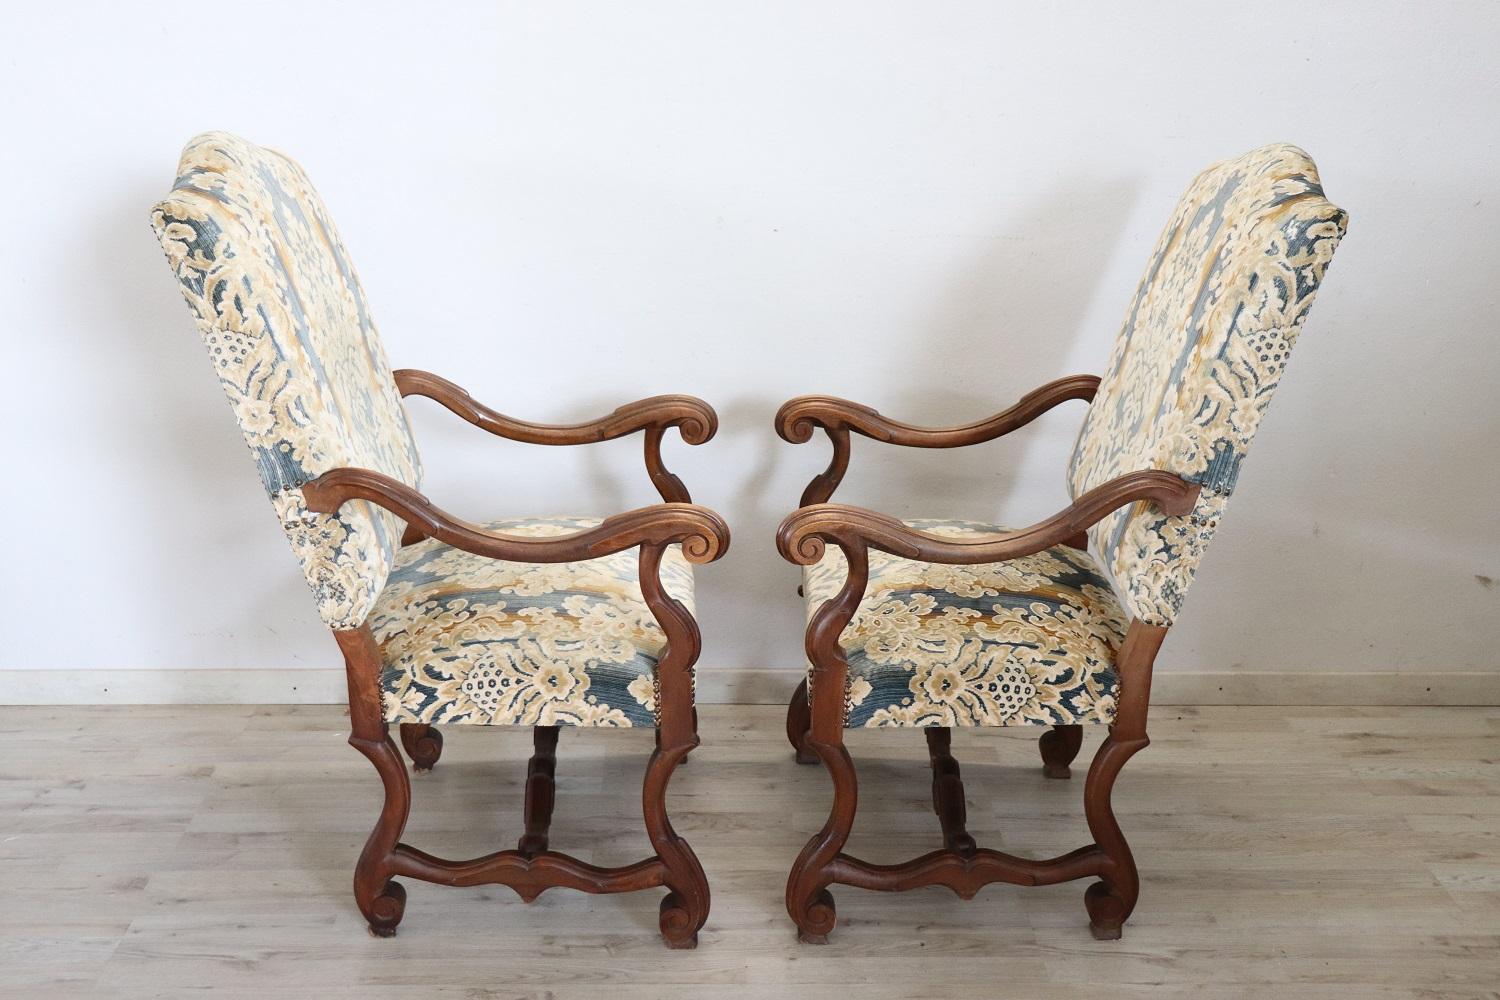 Italian Louis XIV style pair of armchairs very comfortable. Made of beech wood with elegant velvet with damask decoration. Excellent condition of wood and padding. Small signs of wear in the velvet on the hips. These two majestic armchairs are